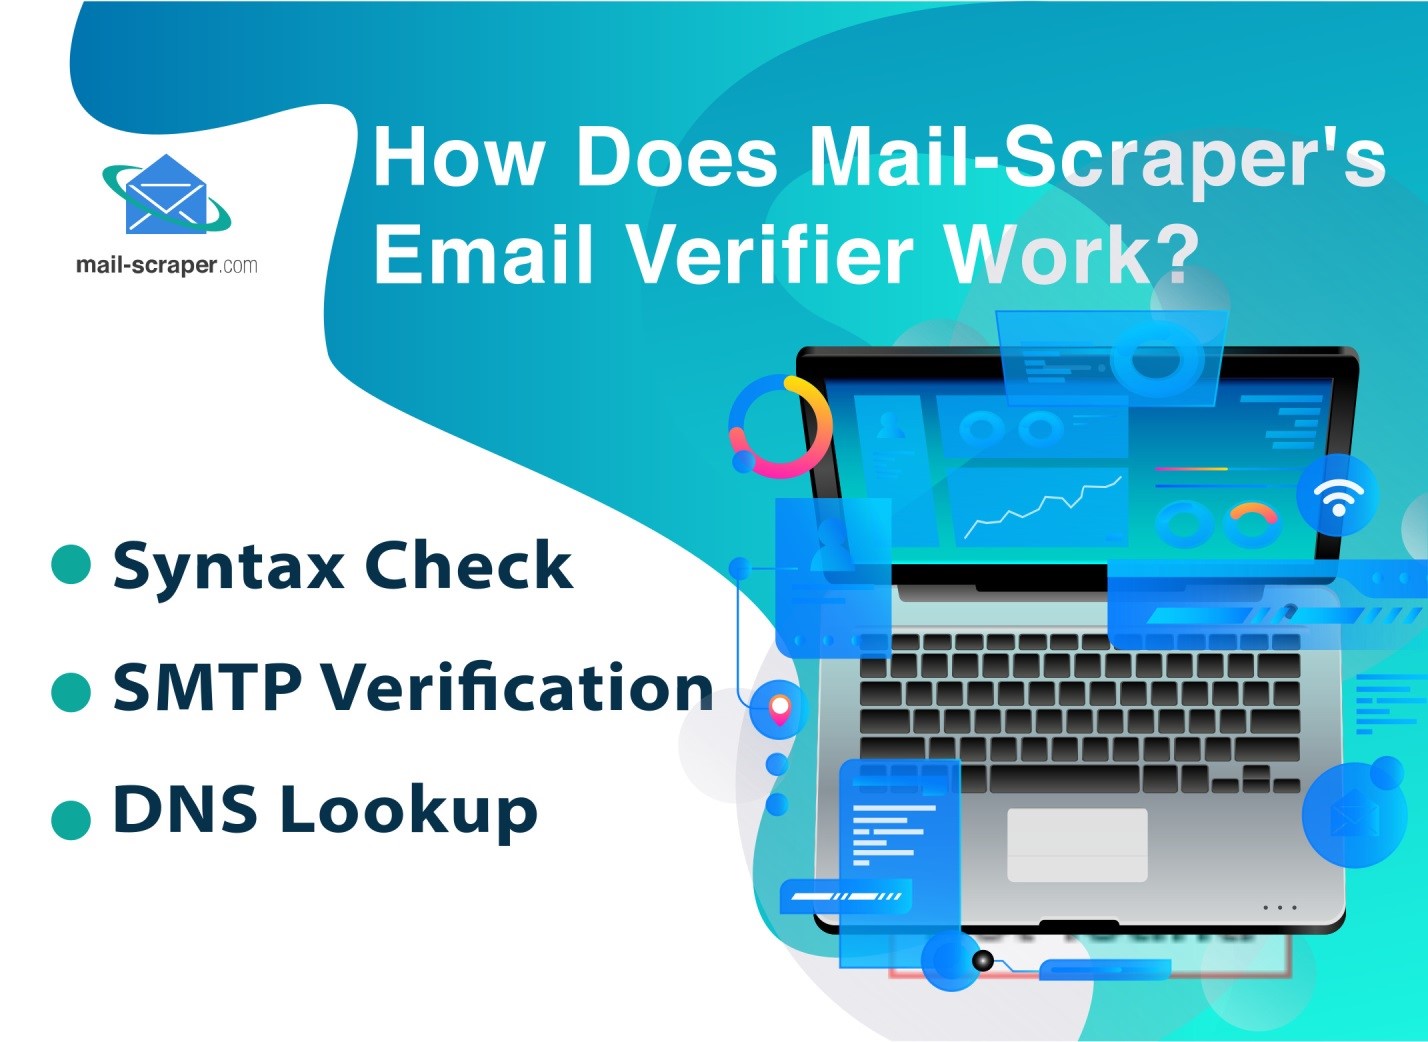 verify email address, address email verify, email test, mail tester, top email marketing helpers, validator email, email validator, email verification service, email checker, bulk email checker, checker email, bulk checker email